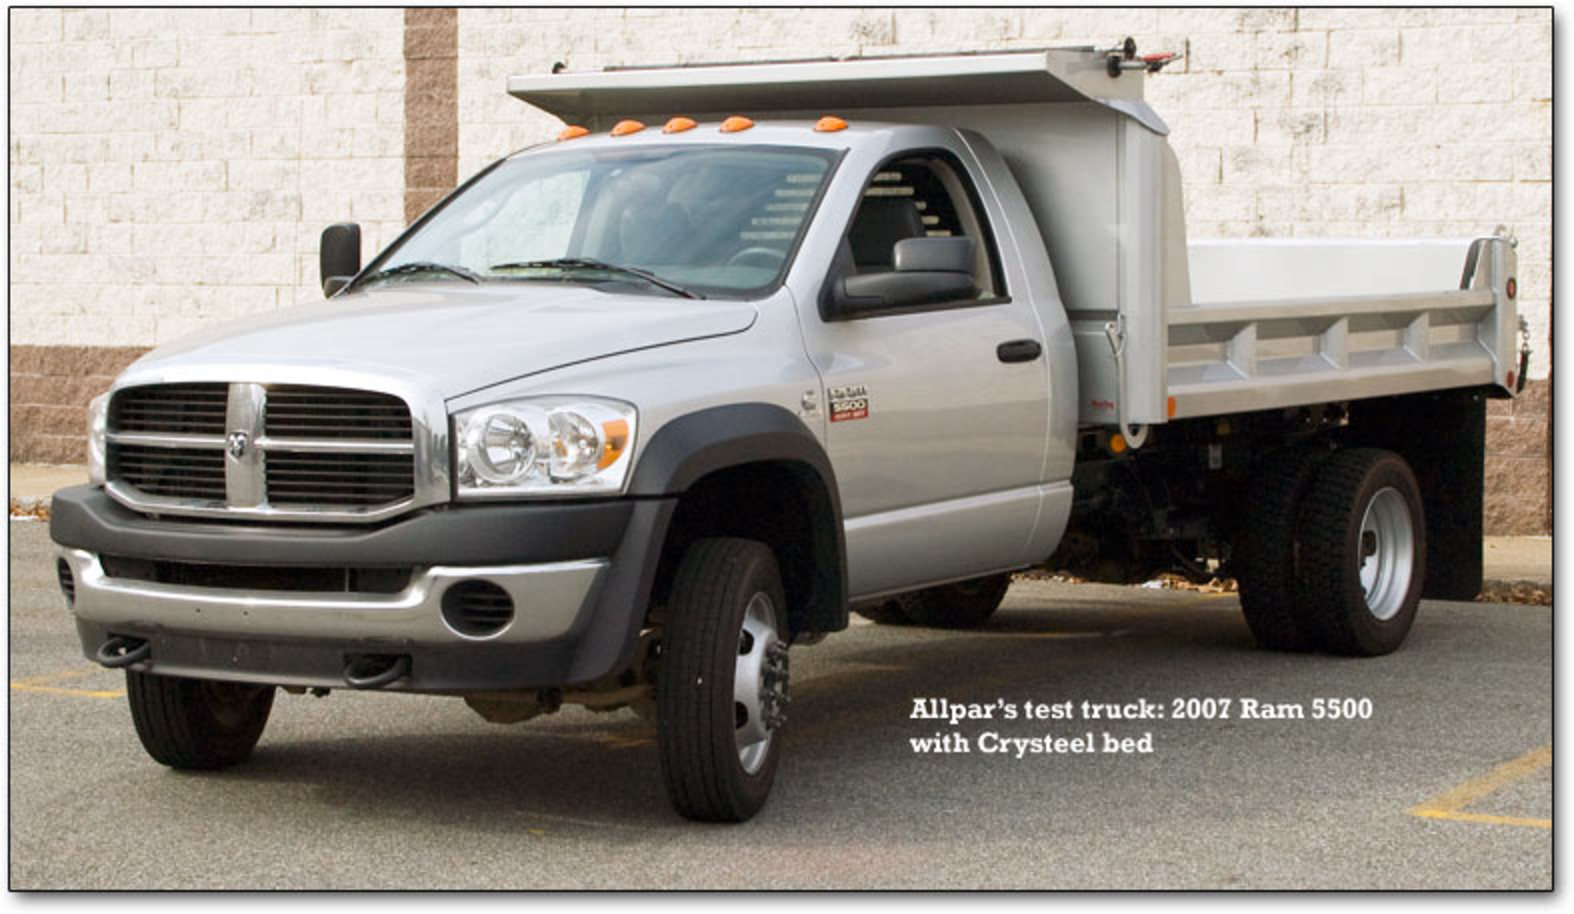 2008-2010 Dodge Ram 4500 and 5500 heavy duty chassis cabs